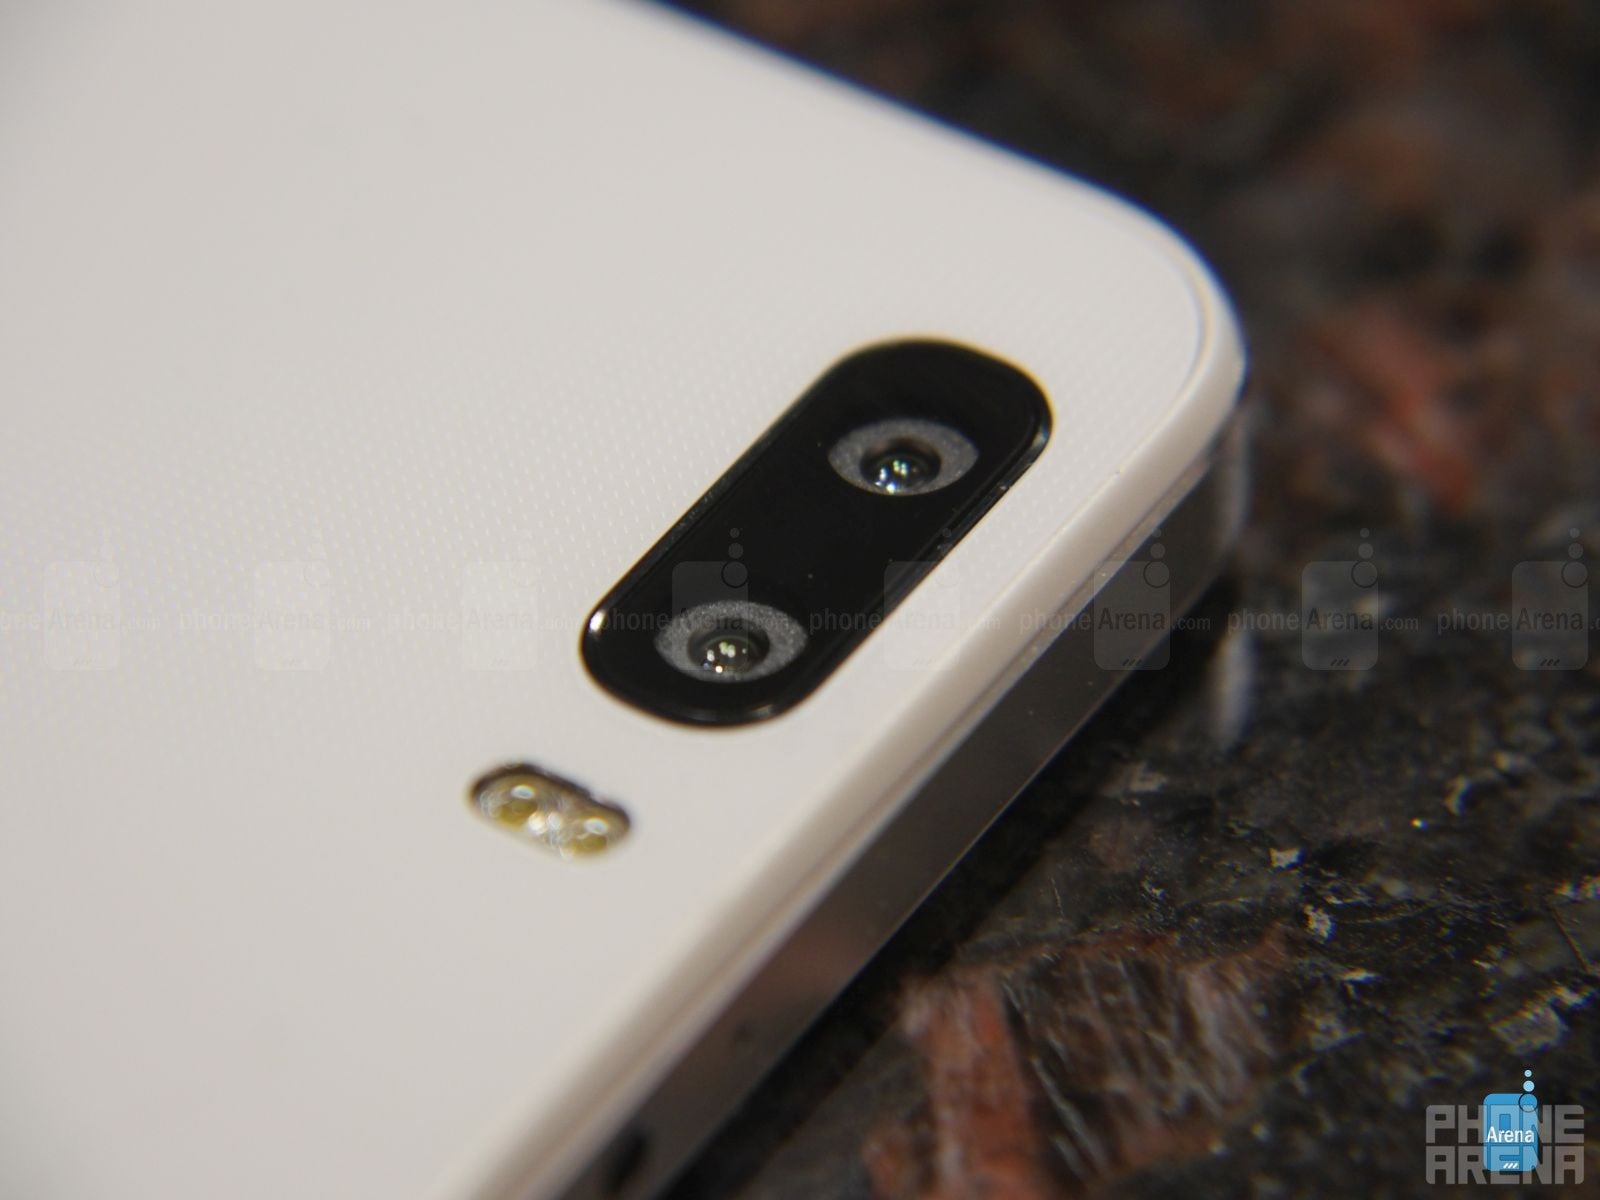 The battle of the bokeh cameras: Huawei Honor 6 Plus versus HTC One M8